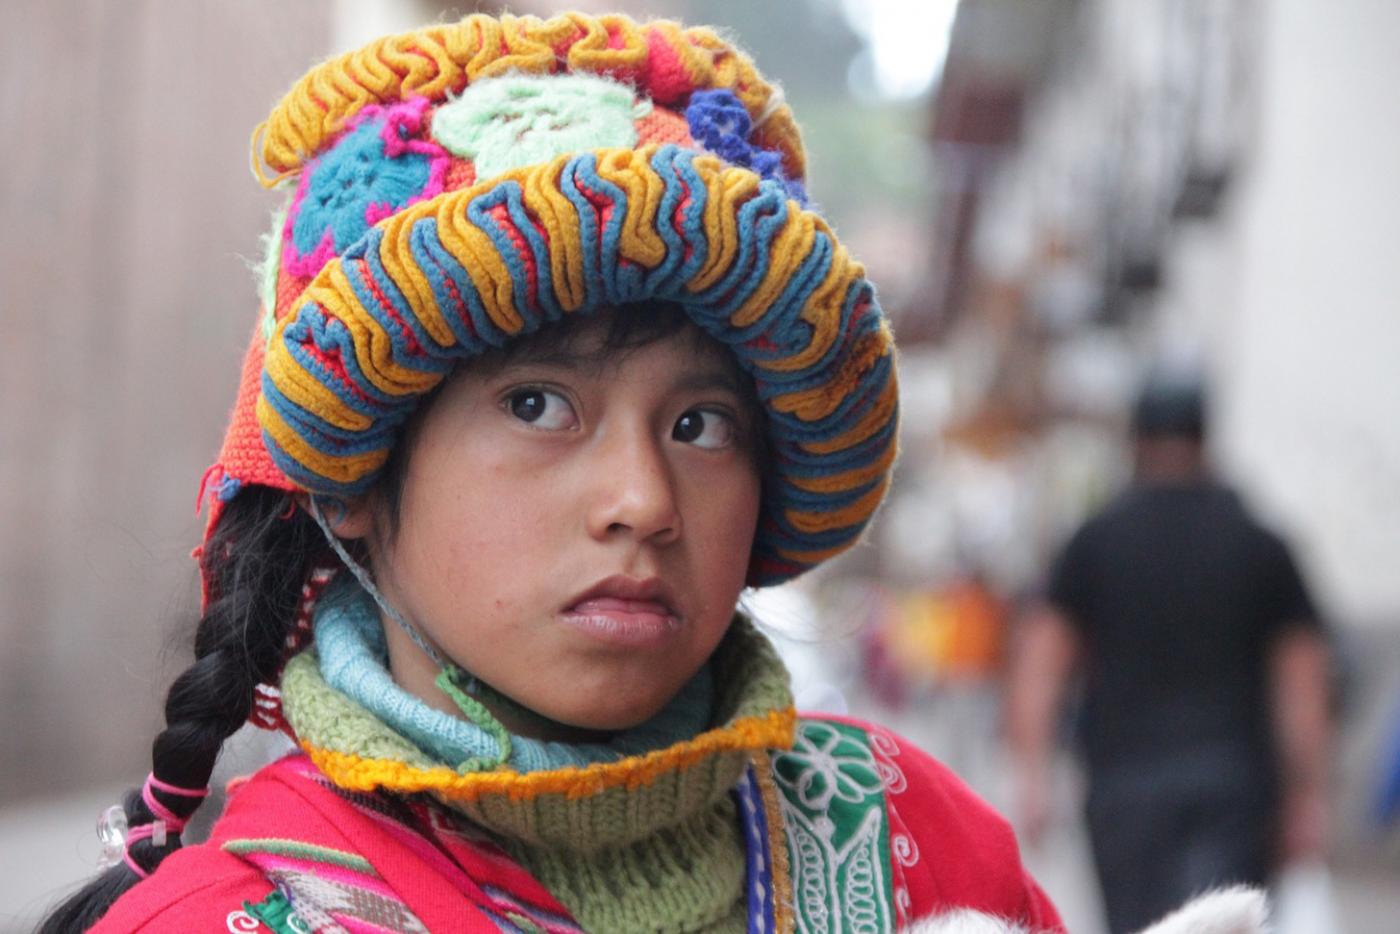 A young Peruvian girl in traditional dress.